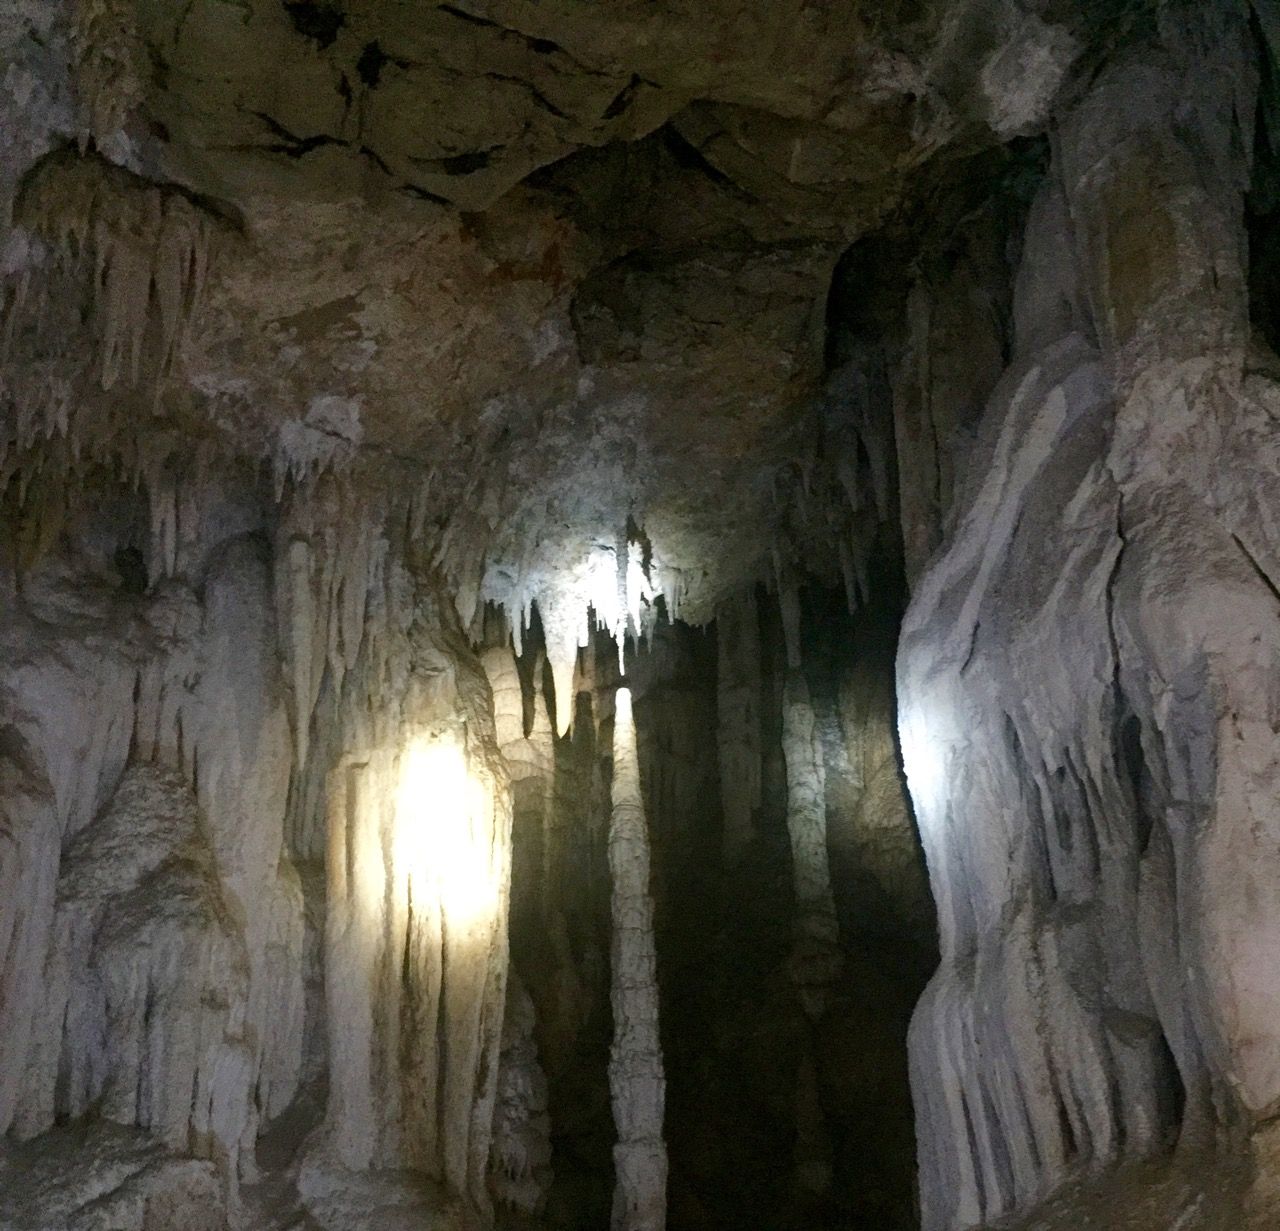 A stalagmite and stalagtite which are very close to forming a solid column.